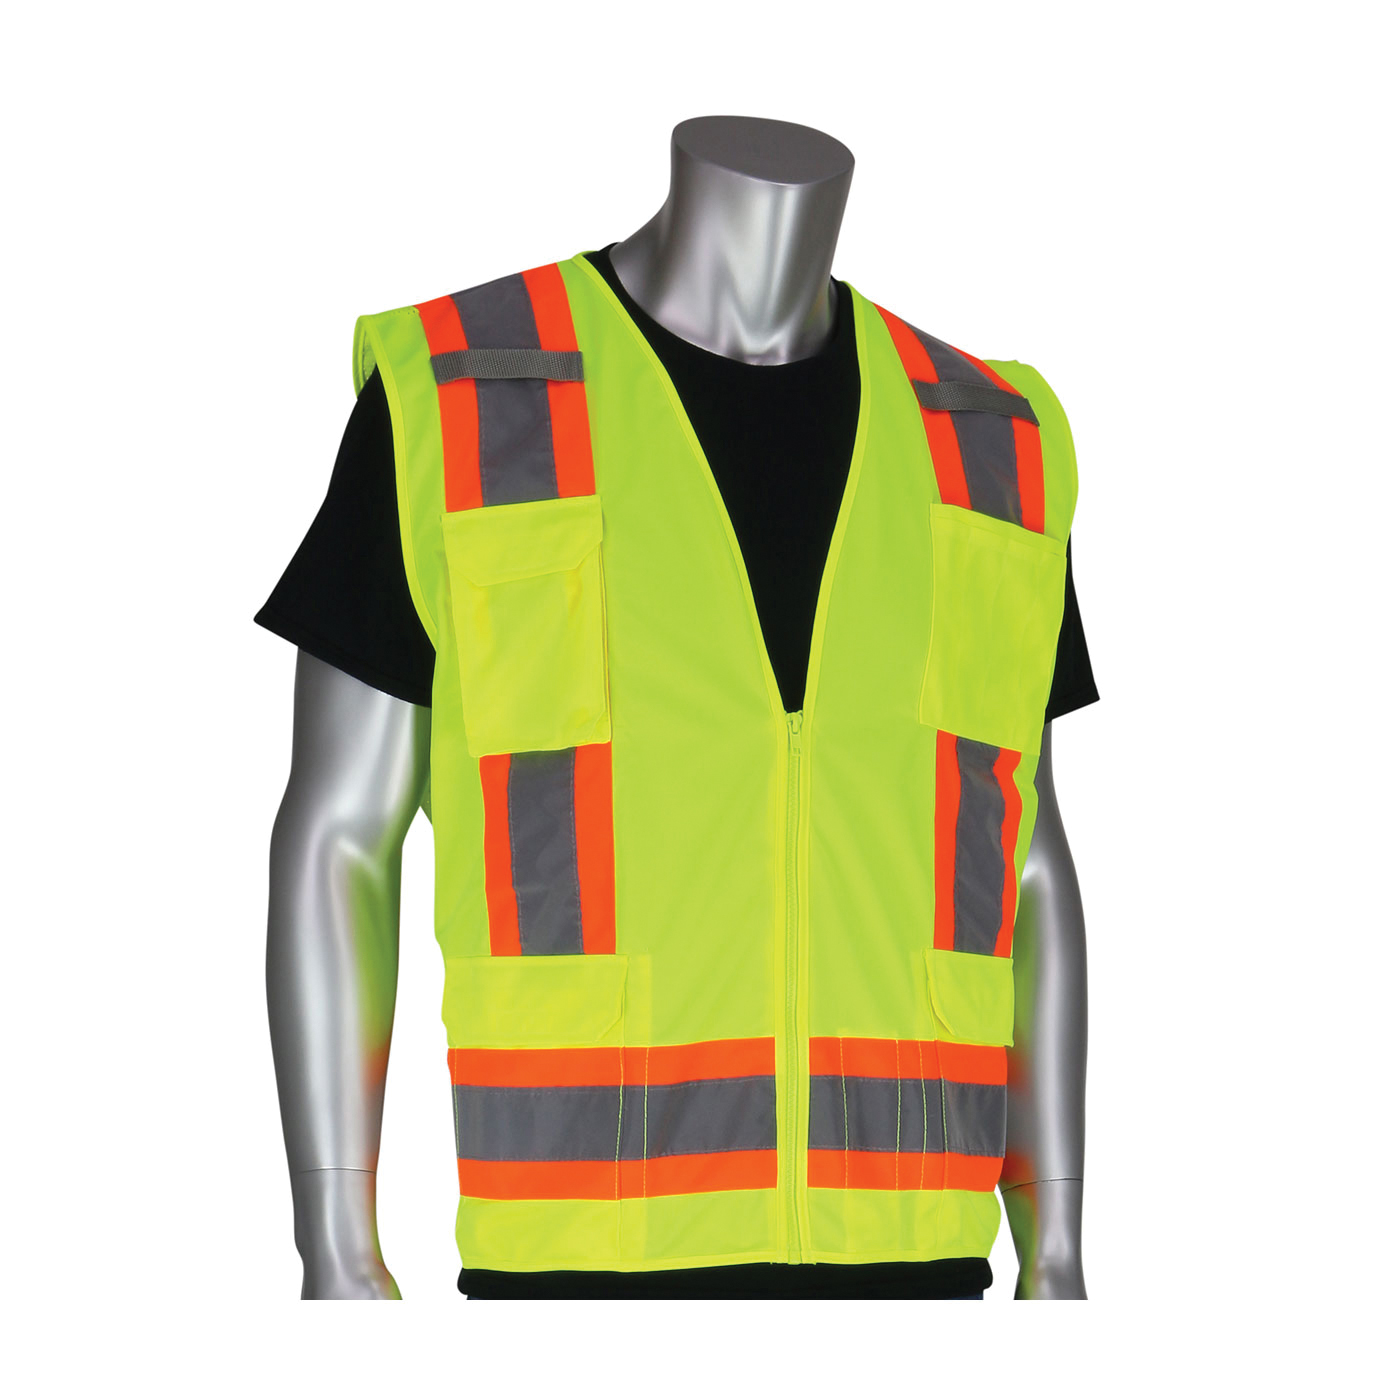 PIP® 302-0500-YEL/5X 2-Tone Surveyor Safety Vest, 5XL, Hi-Viz Lime Yellow, Polyester/Solid Tricot, Zipper Closure, 11 Pockets, ANSI Class: Class 2, Specifications Met: ANSI 107 Type R